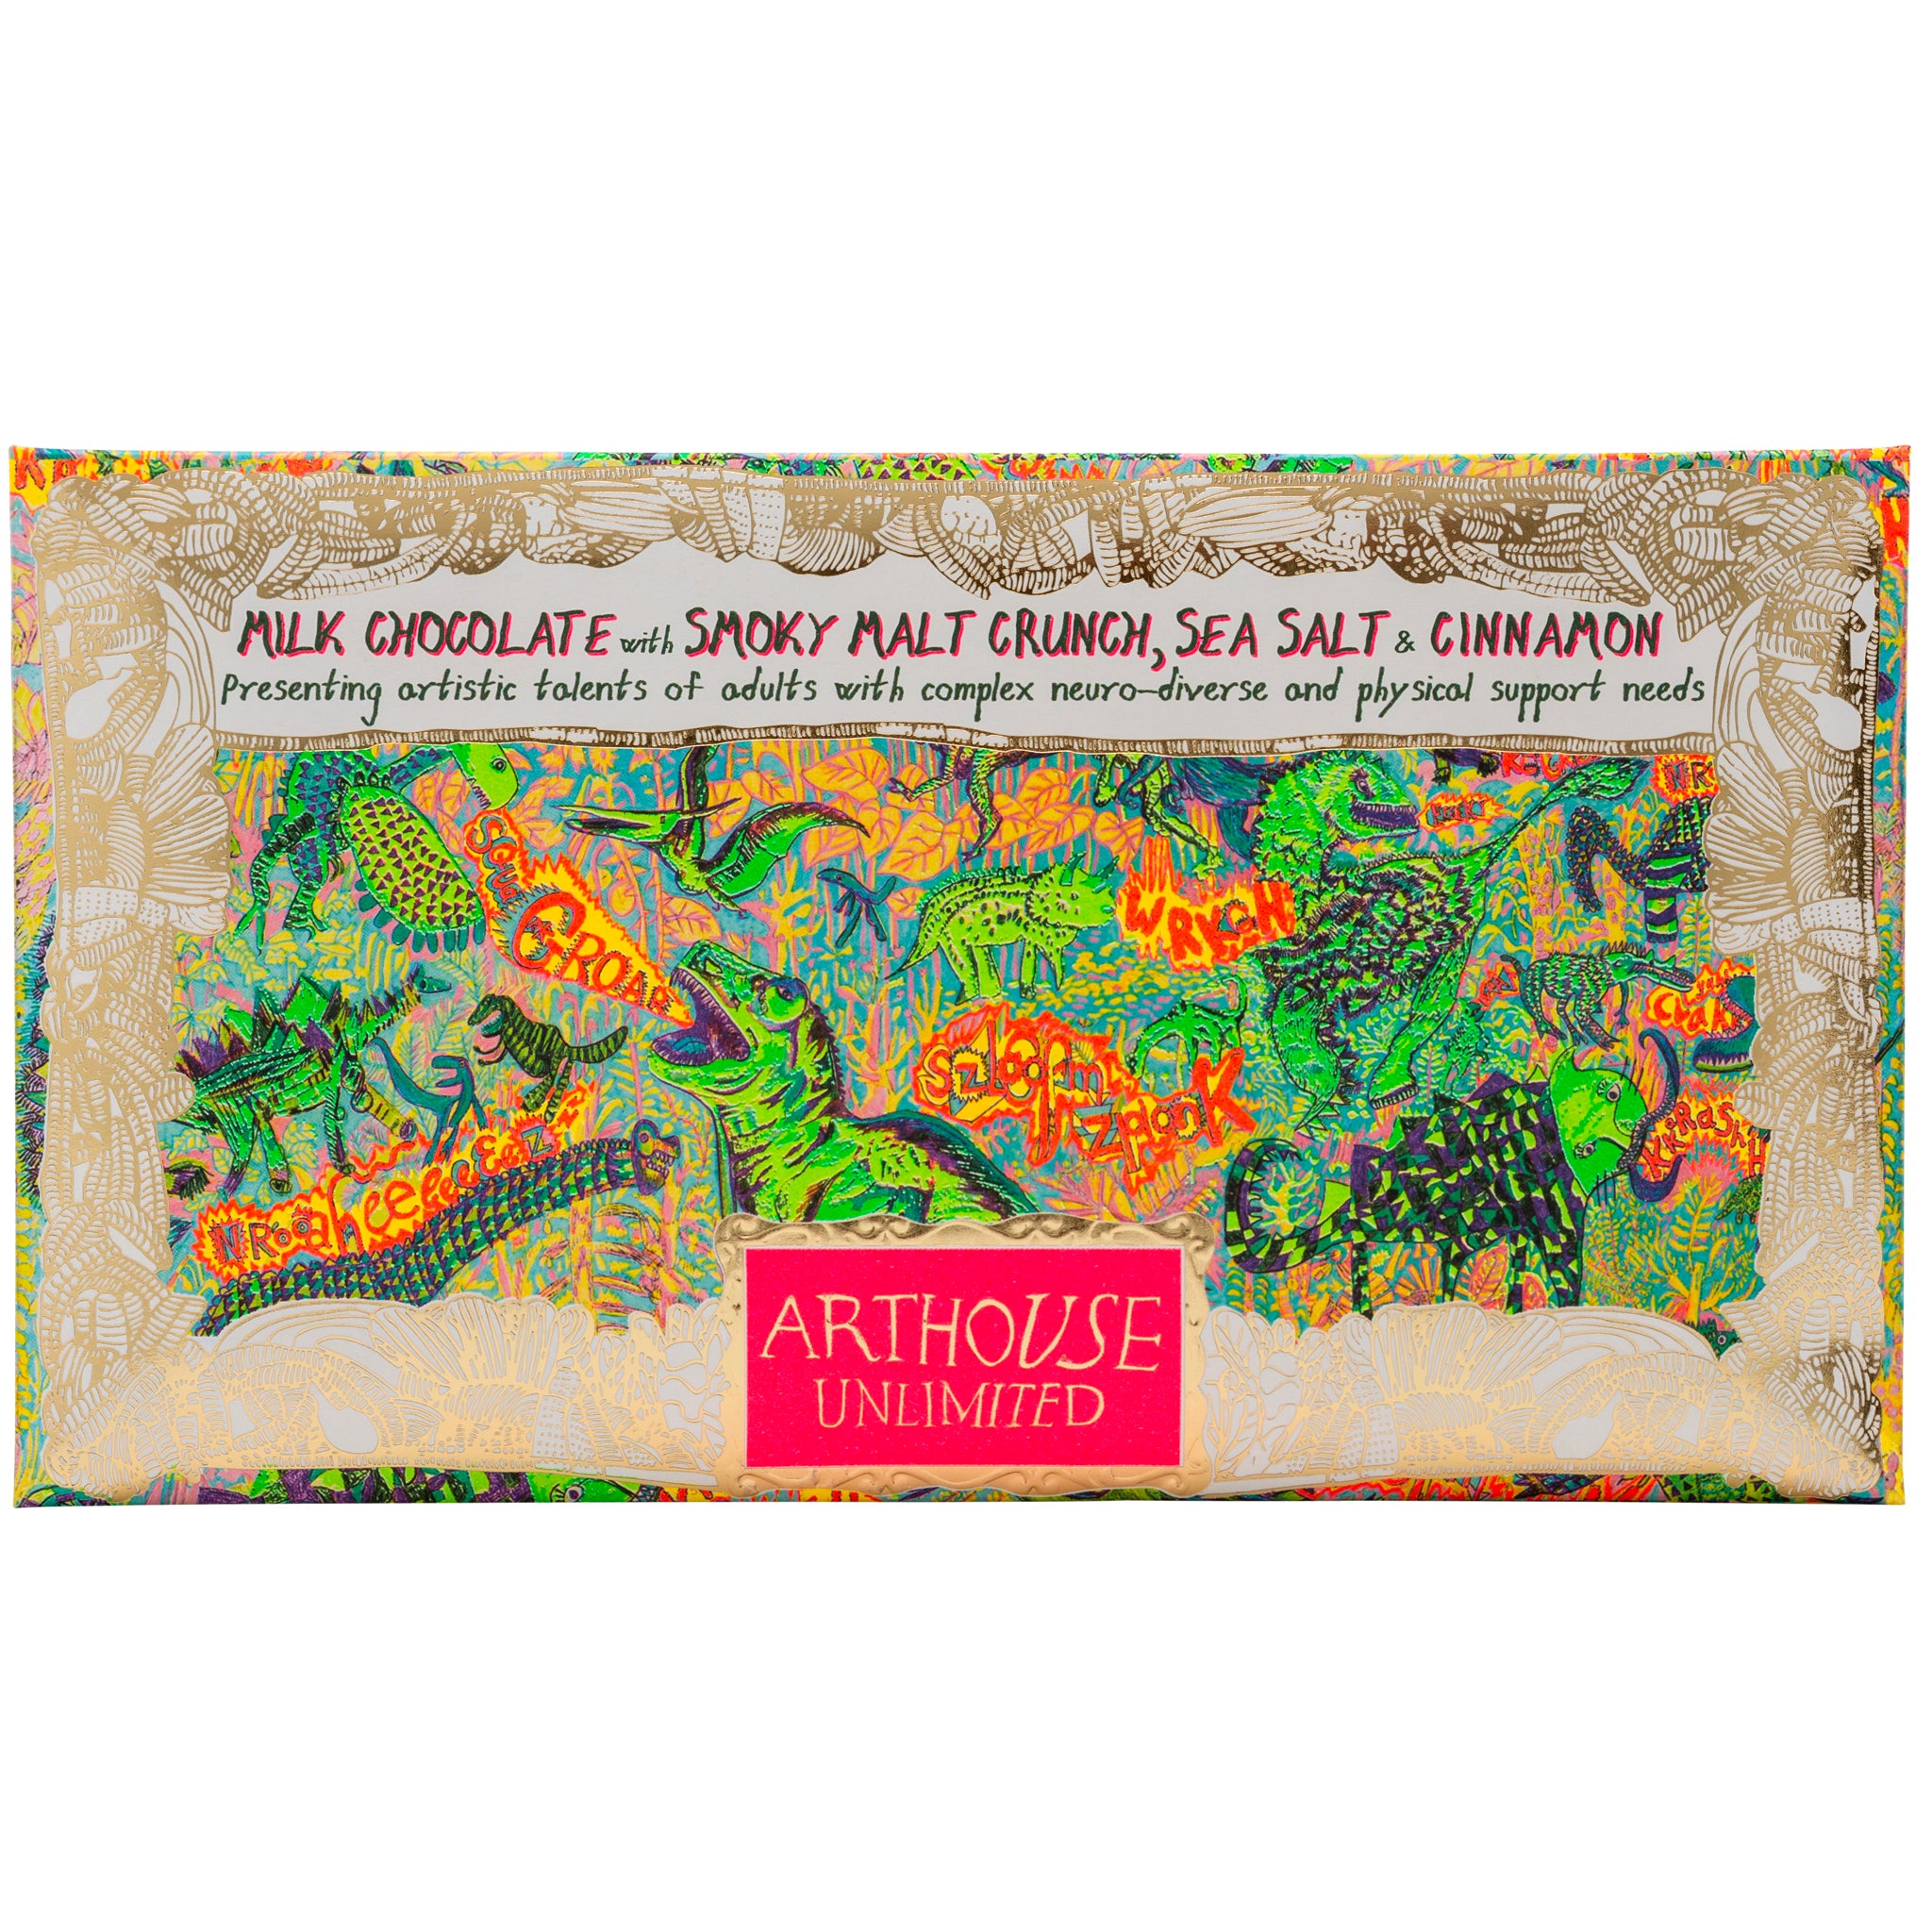 Green, red and gold packet of Dinosaurs, Milk Chocolate Bar with Smoky Malt Crunch, Sea Salt & Cinnamon